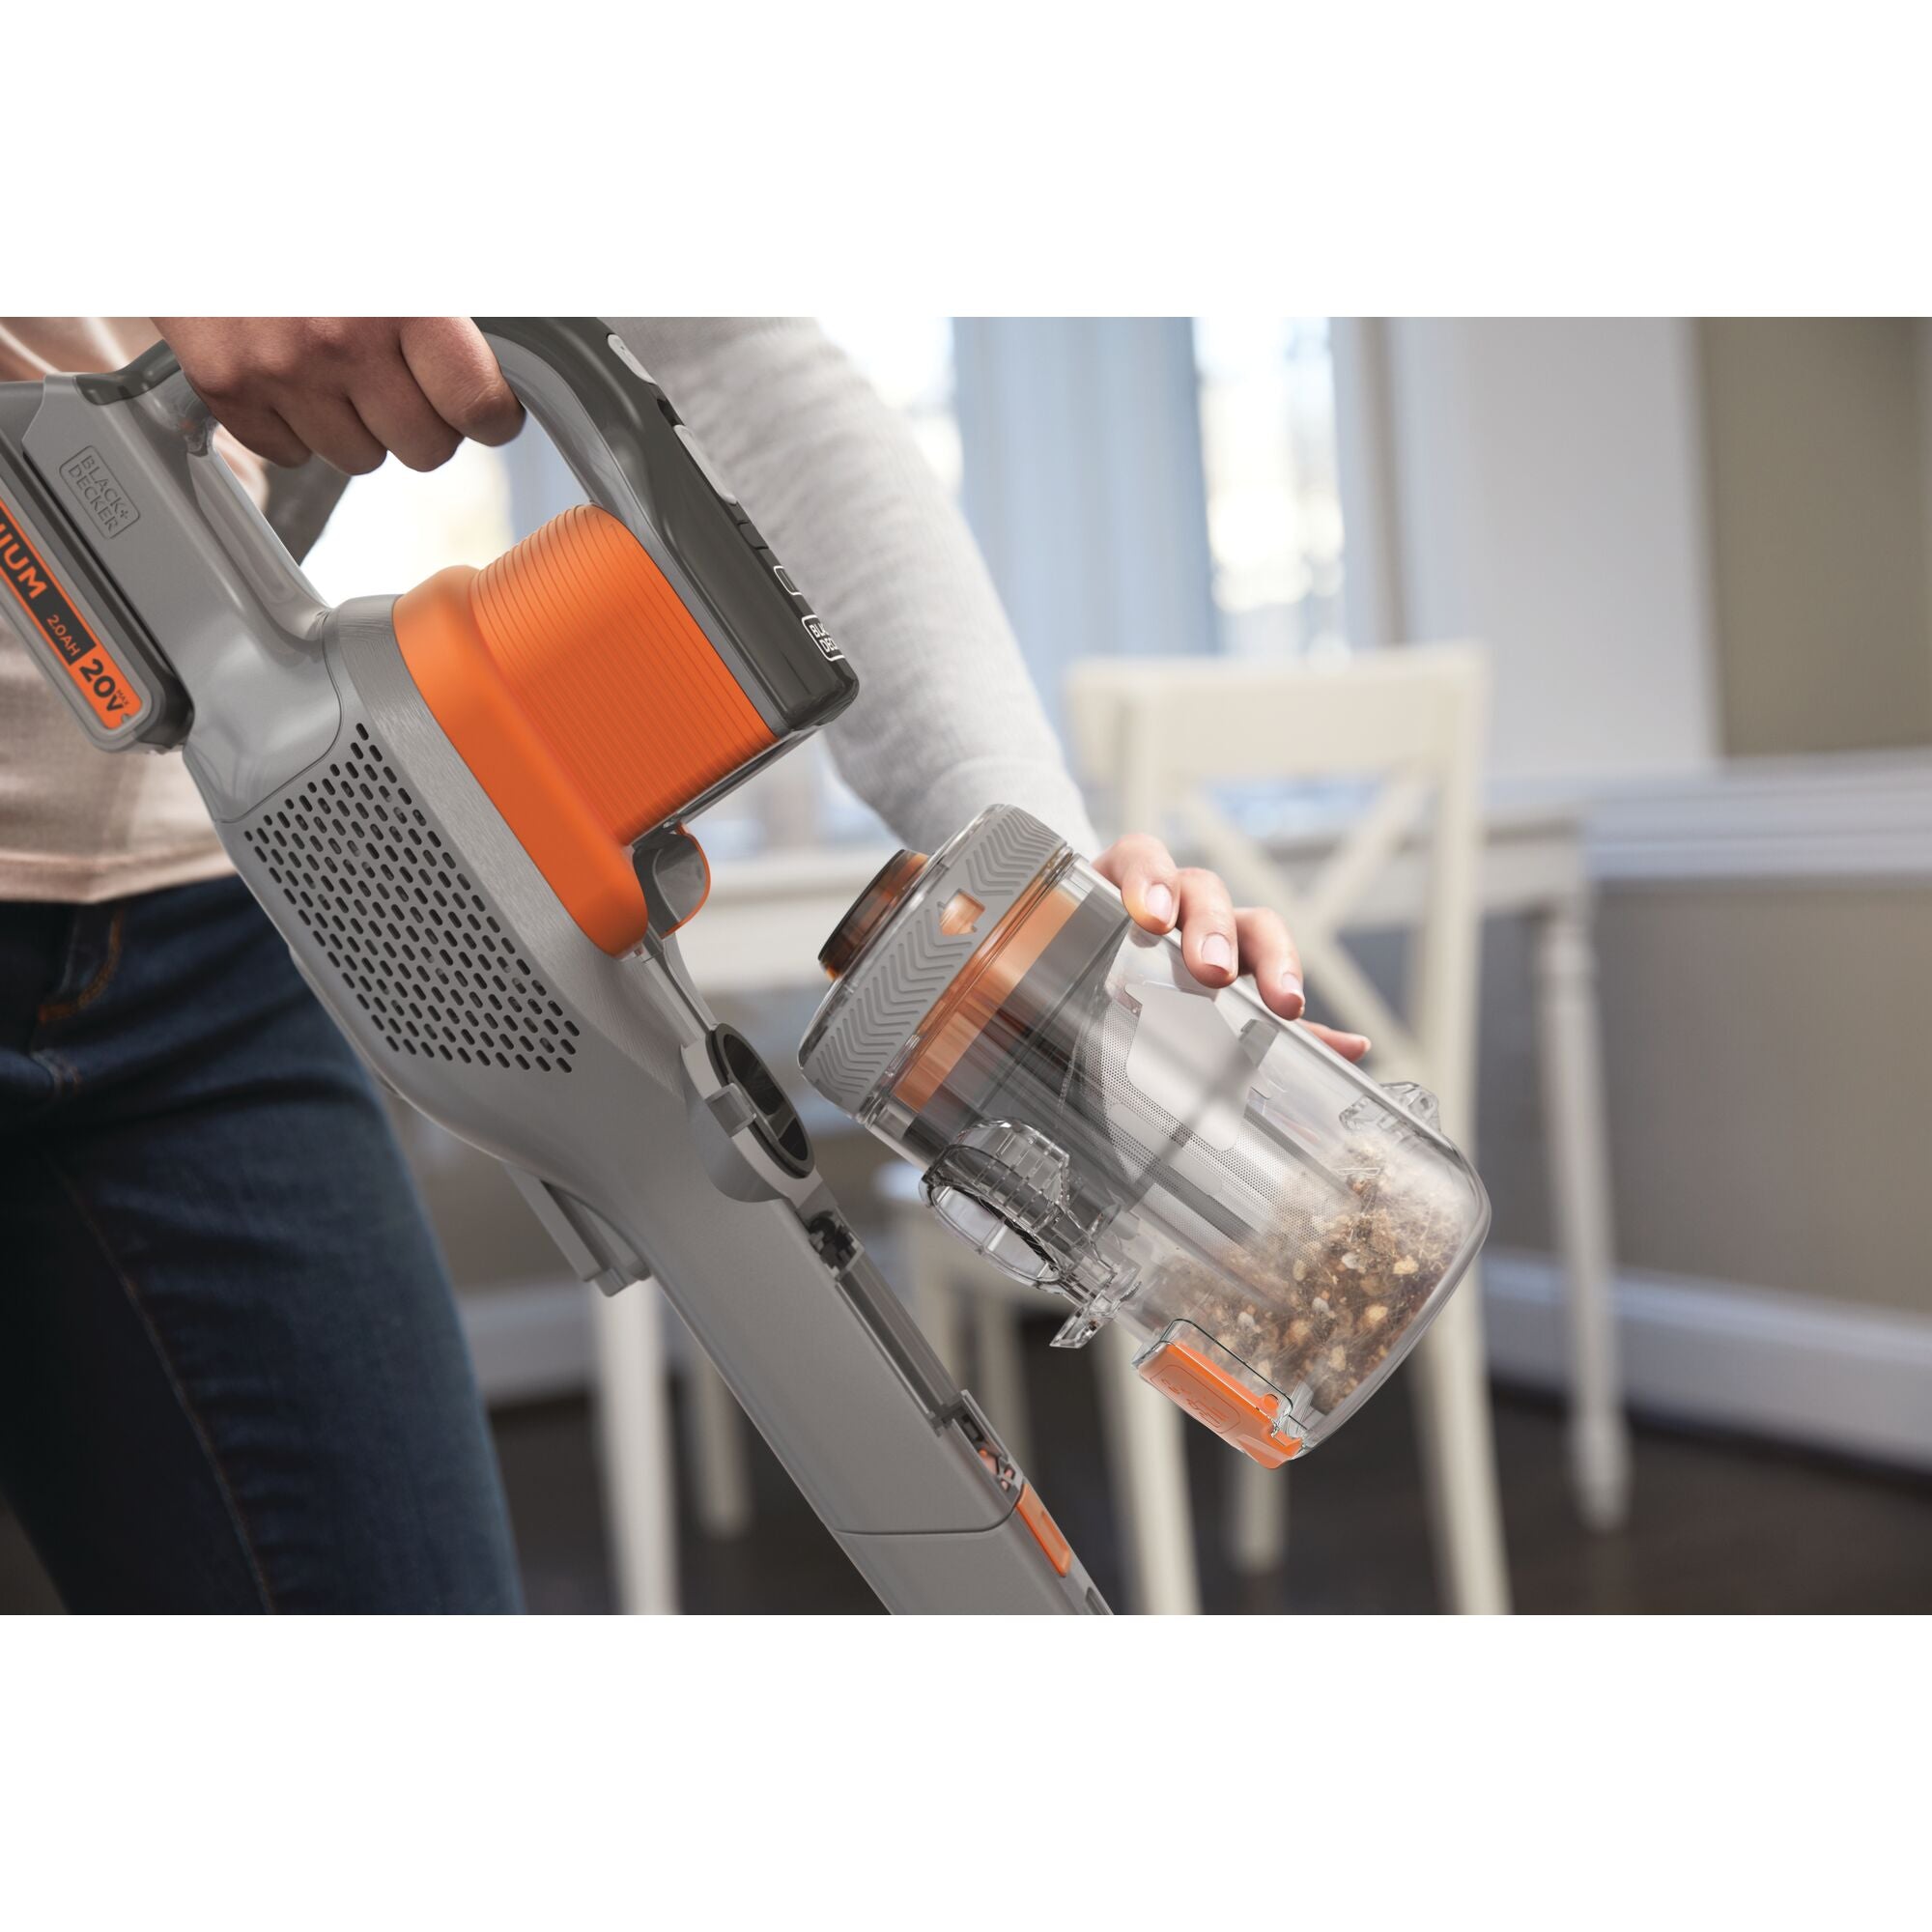 An overview of the BLACK+DECKER POWERSERIES™ Extreme™ Cordless Stick Vacuum Cleaner.